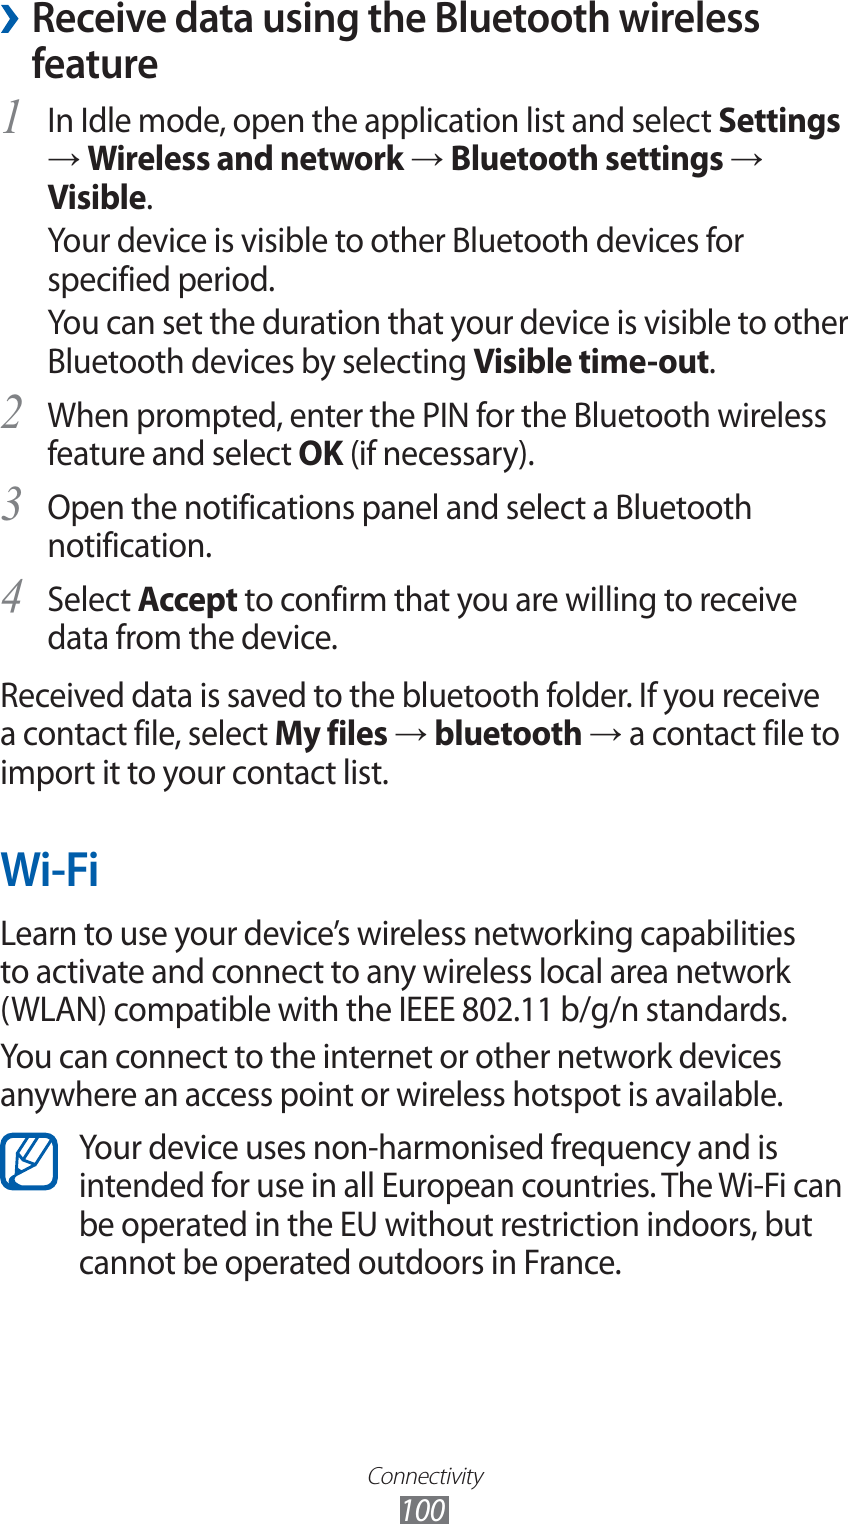 Connectivity100 ›Receive data using the Bluetooth wireless featureIn Idle mode, open the application list and select 1 Settings → Wireless and network → Bluetooth settings → Visible.Your device is visible to other Bluetooth devices for specified period.You can set the duration that your device is visible to other Bluetooth devices by selecting Visible time-out.When prompted, enter the PIN for the Bluetooth wireless 2 feature and select OK (if necessary).Open the notifications panel and select a Bluetooth 3 notification.Select 4 Accept to confirm that you are willing to receive data from the device.Received data is saved to the bluetooth folder. If you receive a contact file, select My files → bluetooth → a contact file to import it to your contact list.Wi-FiLearn to use your device’s wireless networking capabilities to activate and connect to any wireless local area network (WLAN) compatible with the IEEE 802.11 b/g/n standards.You can connect to the internet or other network devices anywhere an access point or wireless hotspot is available.Your device uses non-harmonised frequency and is intended for use in all European countries. The Wi-Fi can be operated in the EU without restriction indoors, but cannot be operated outdoors in France.